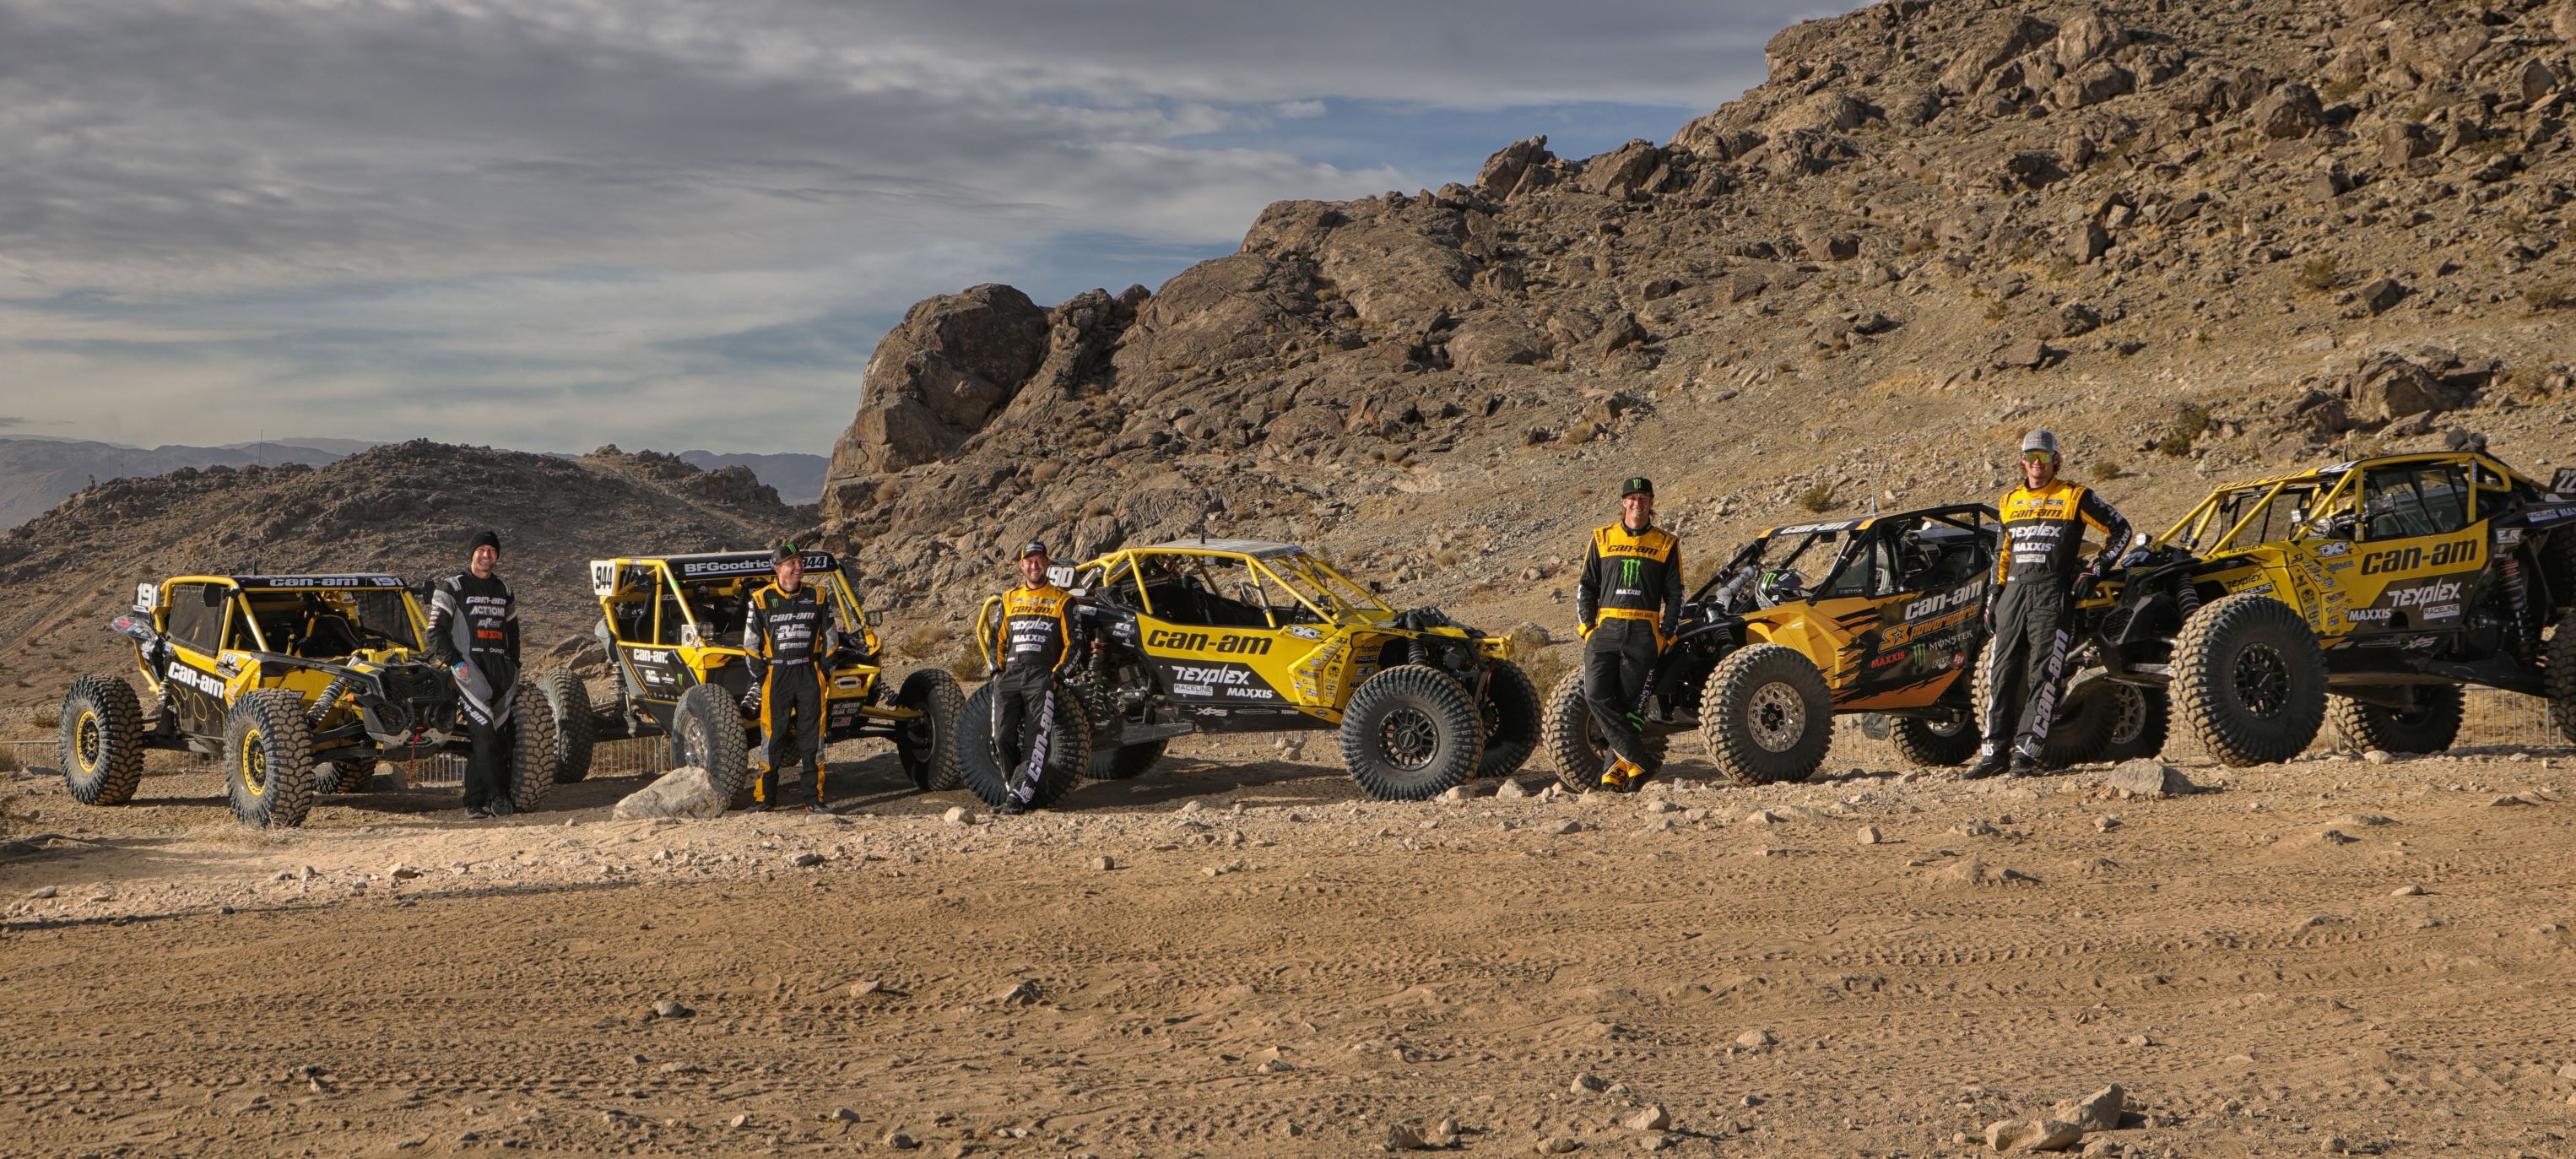 The Can-Am Yellow Racing team standing infront of their parked vehicles during the KOH race